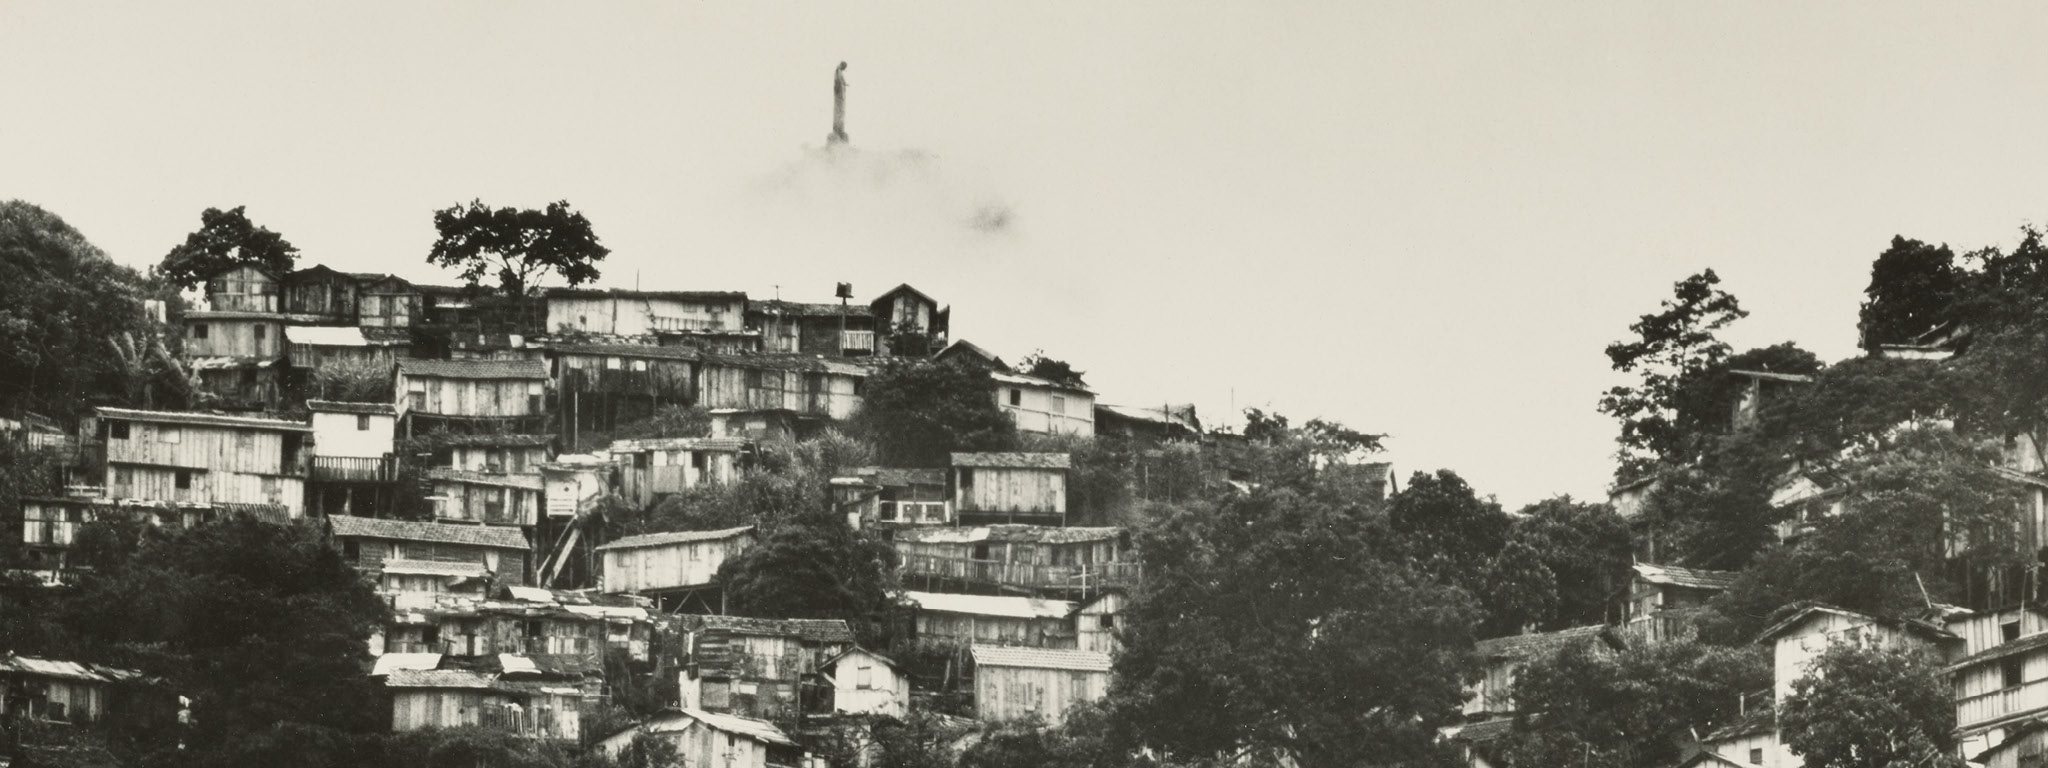 Catacumba Favela, Rio de Janeiro, Brazil, negative 1961; printed later, Gordon Parks, gelatin silver print. The J. Paul Getty Museum. Purchased with funds provided by the Photographs Council. © The Gordon Parks Foundation